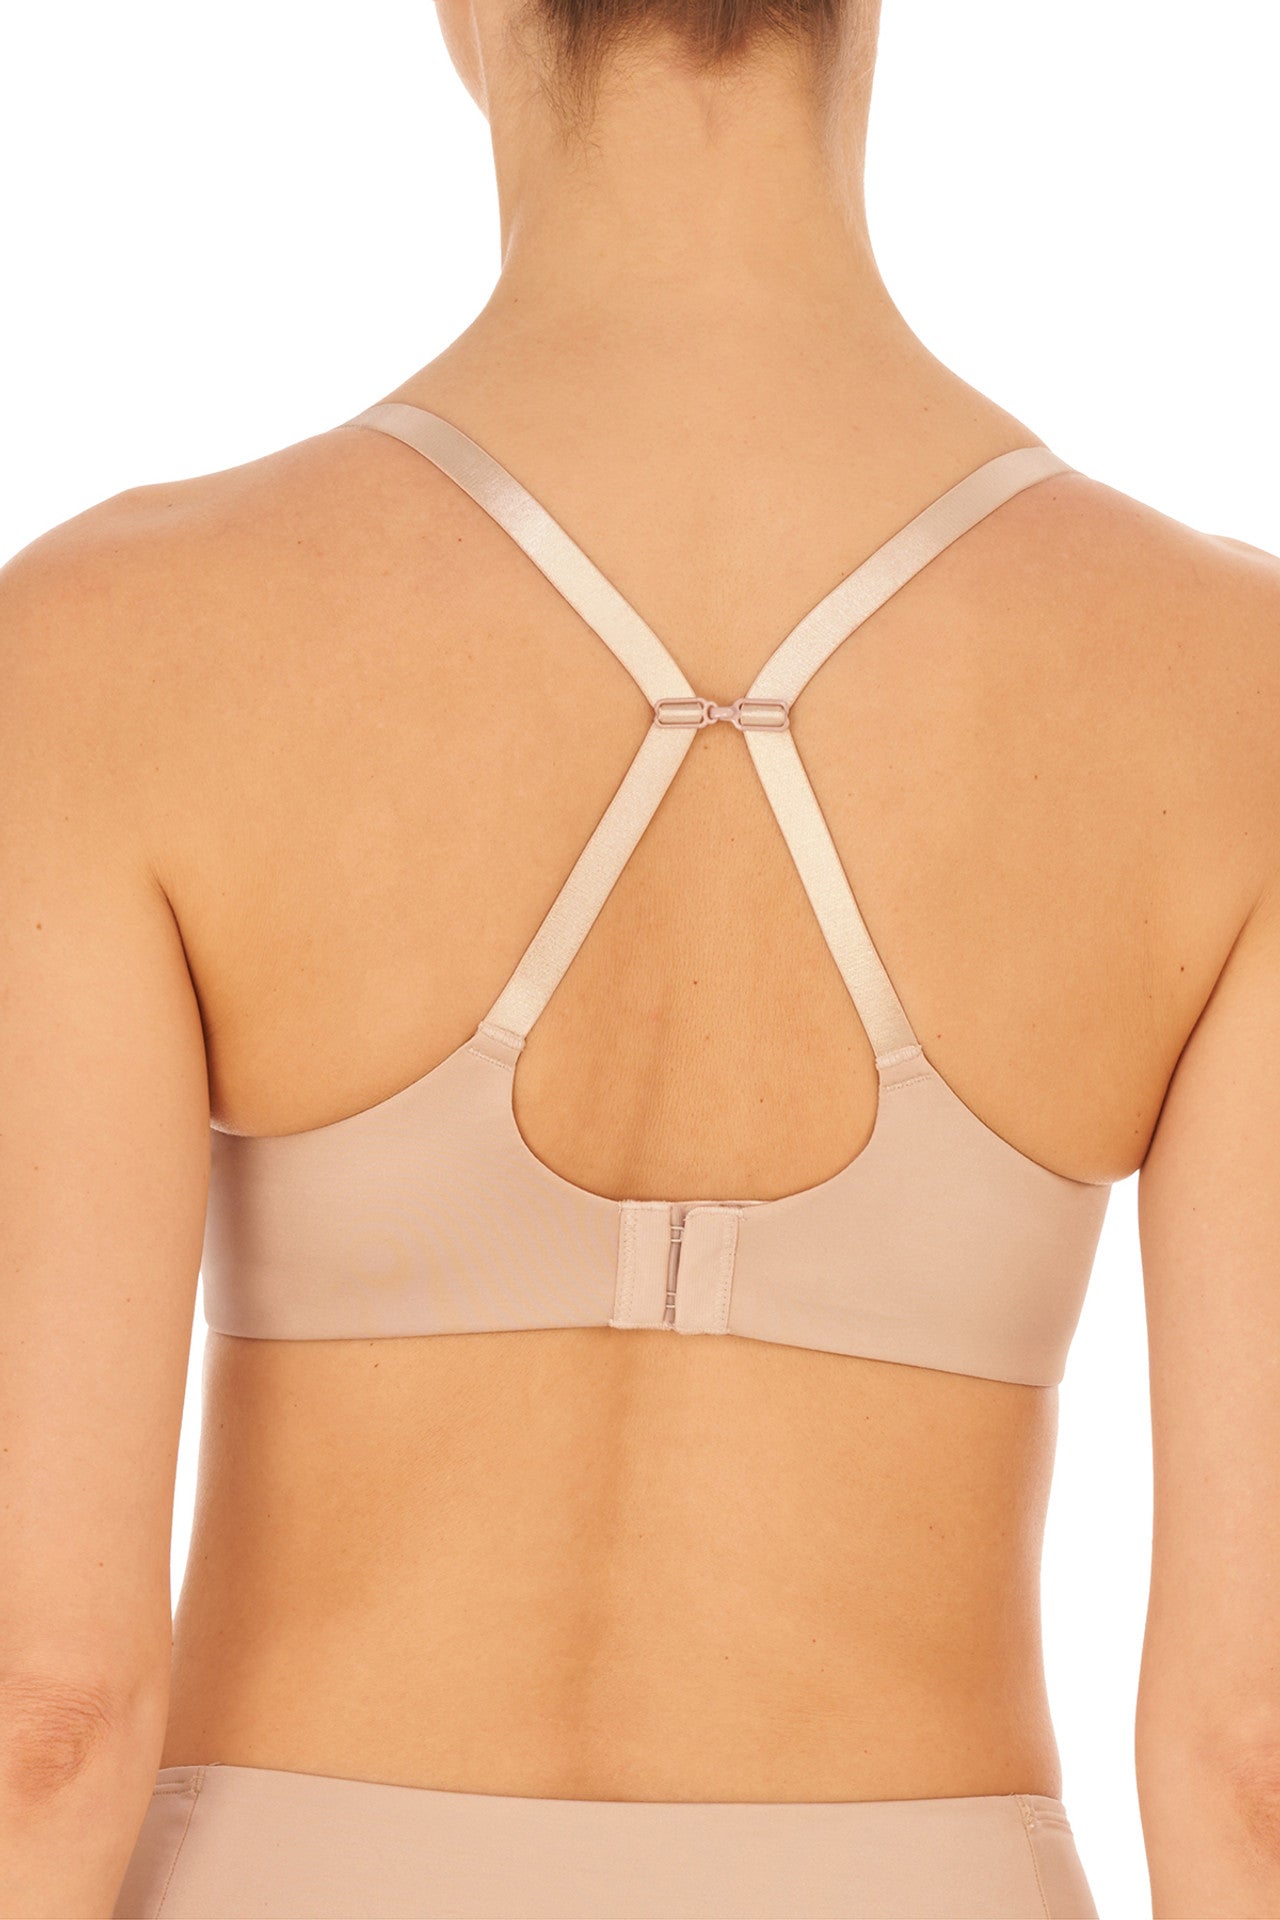 This Supportive (Yet Sexy) Natori Bra Is on Sale Today